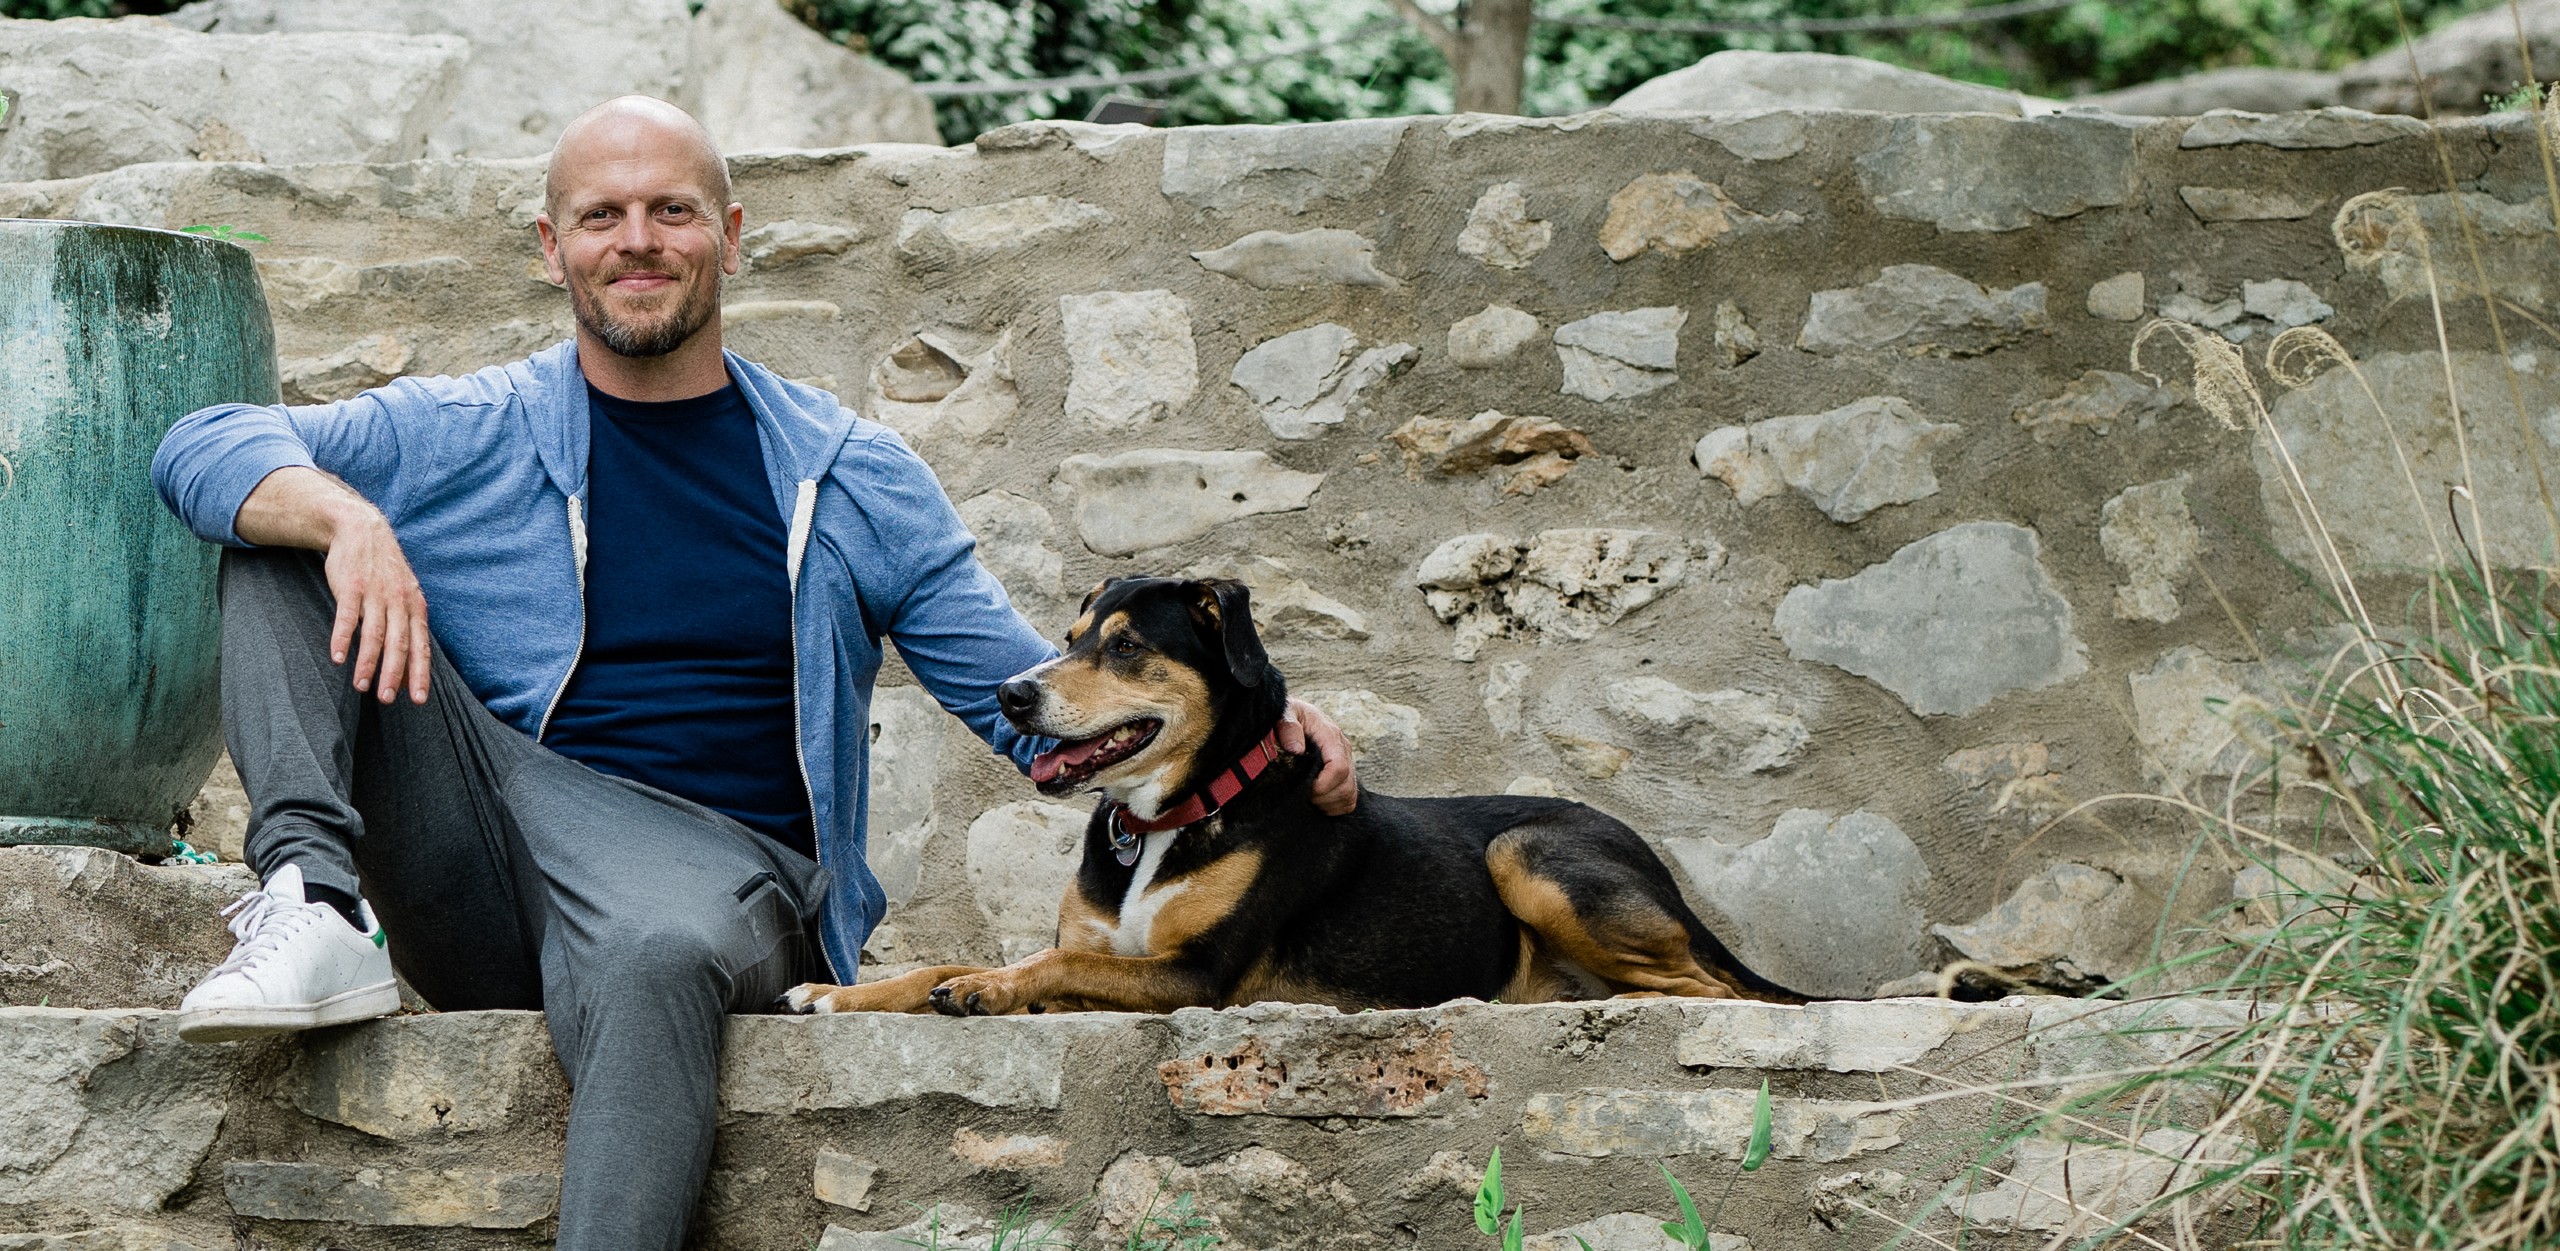 The Tim Ferriss Show Transcripts: Derek Sivers — The Joys of an  Un-Optimized Life, Finding Paths Less Traveled, Creating Tech Independence  (and Risks of the Cloud), Taking Giant Leaps, and Picking the